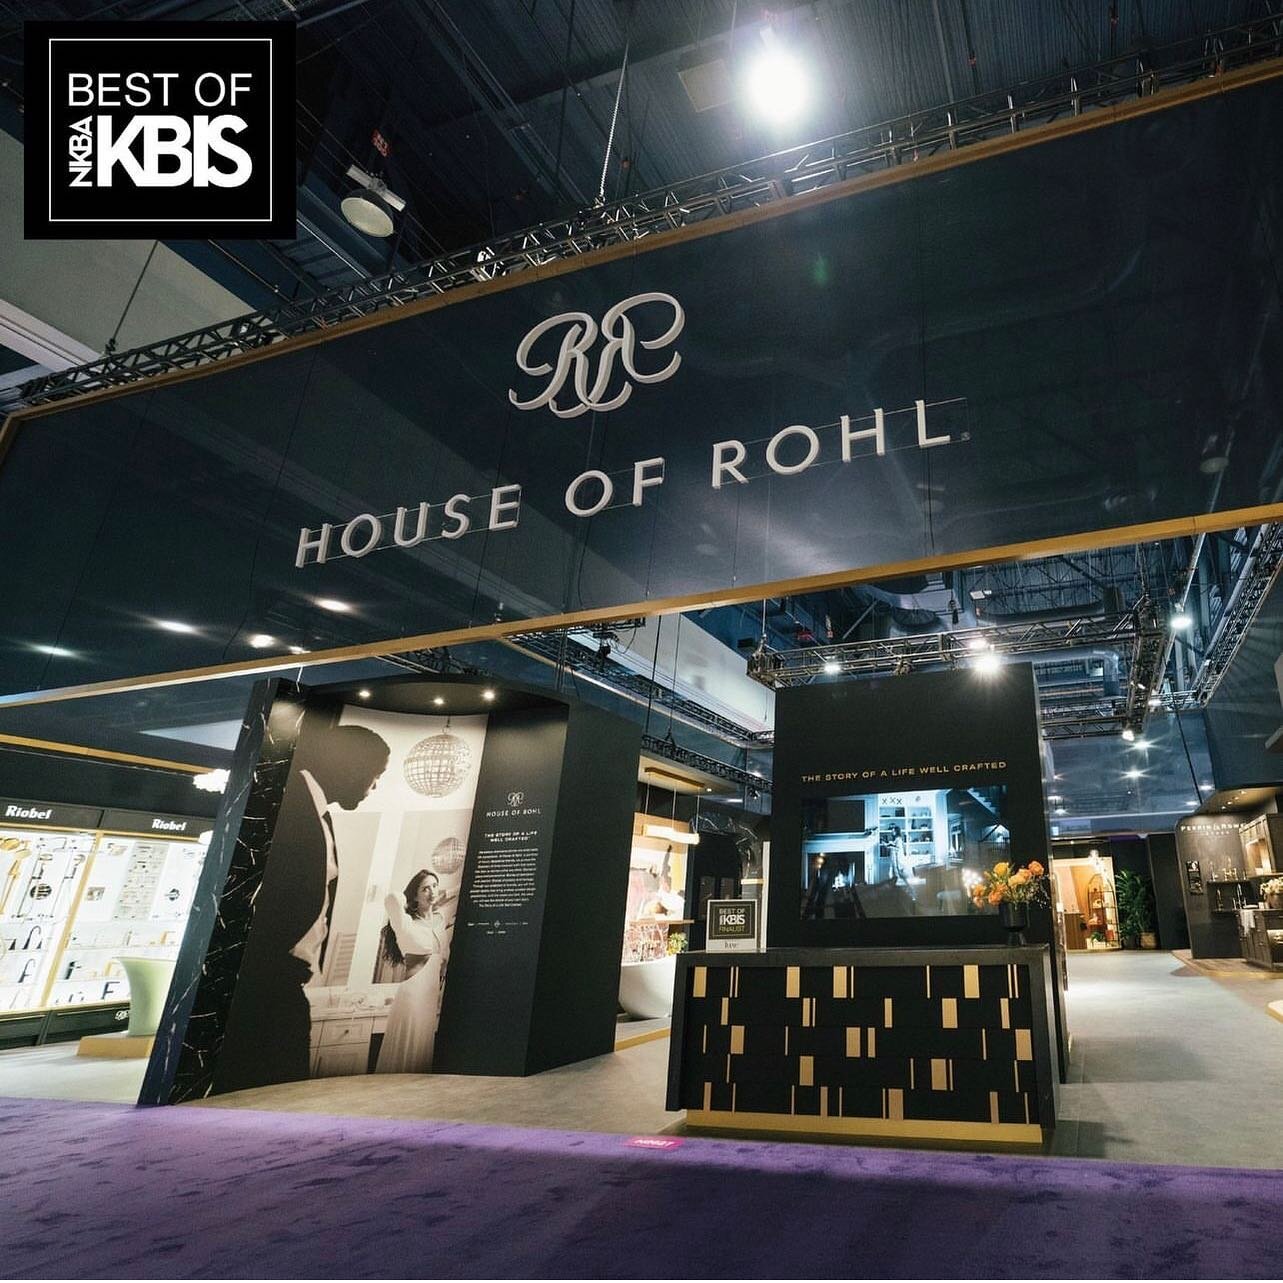 BIG NEWS!  The House of Rohl showroom won the Best of KBIS large showroom award. I&rsquo;m so proud to have been a part of this amazing team.  The marketing and showroom team that developed the Cravings collaboration with Food &amp; Wine put together